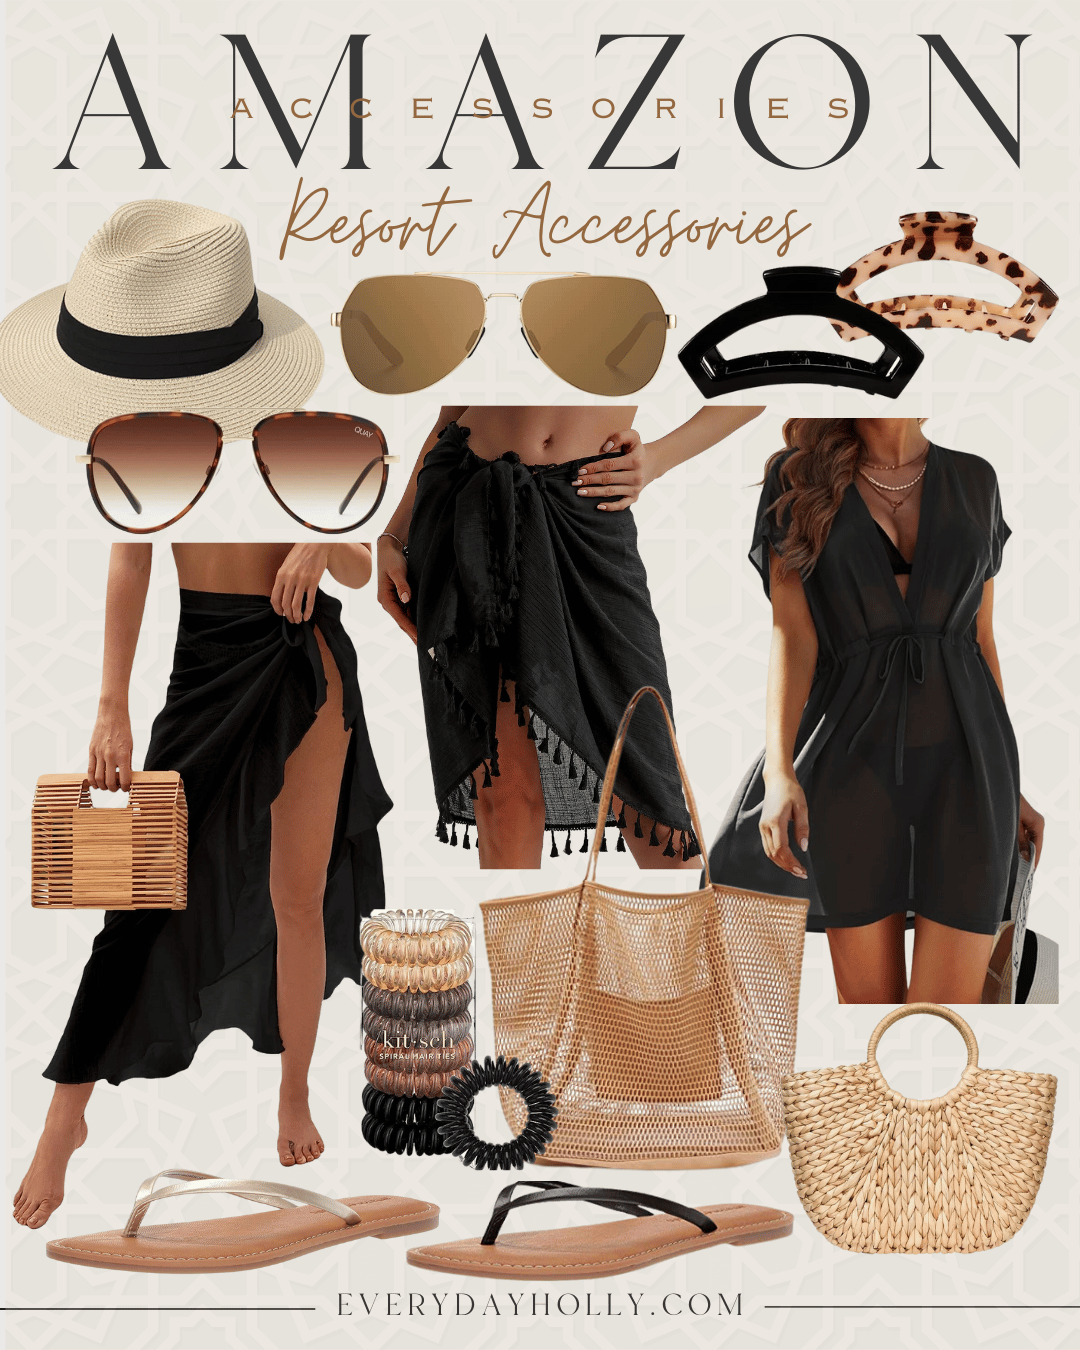 the ultimate guide to resort style swimwear, dresses, accessories, and more | guide, resort, resort style, vacation, spring break, beach, resort accessories, accessories, sun hat, sunglasses, hair clip, claw clip, cover up, sarong, mesh tote, beach tote, hair ties